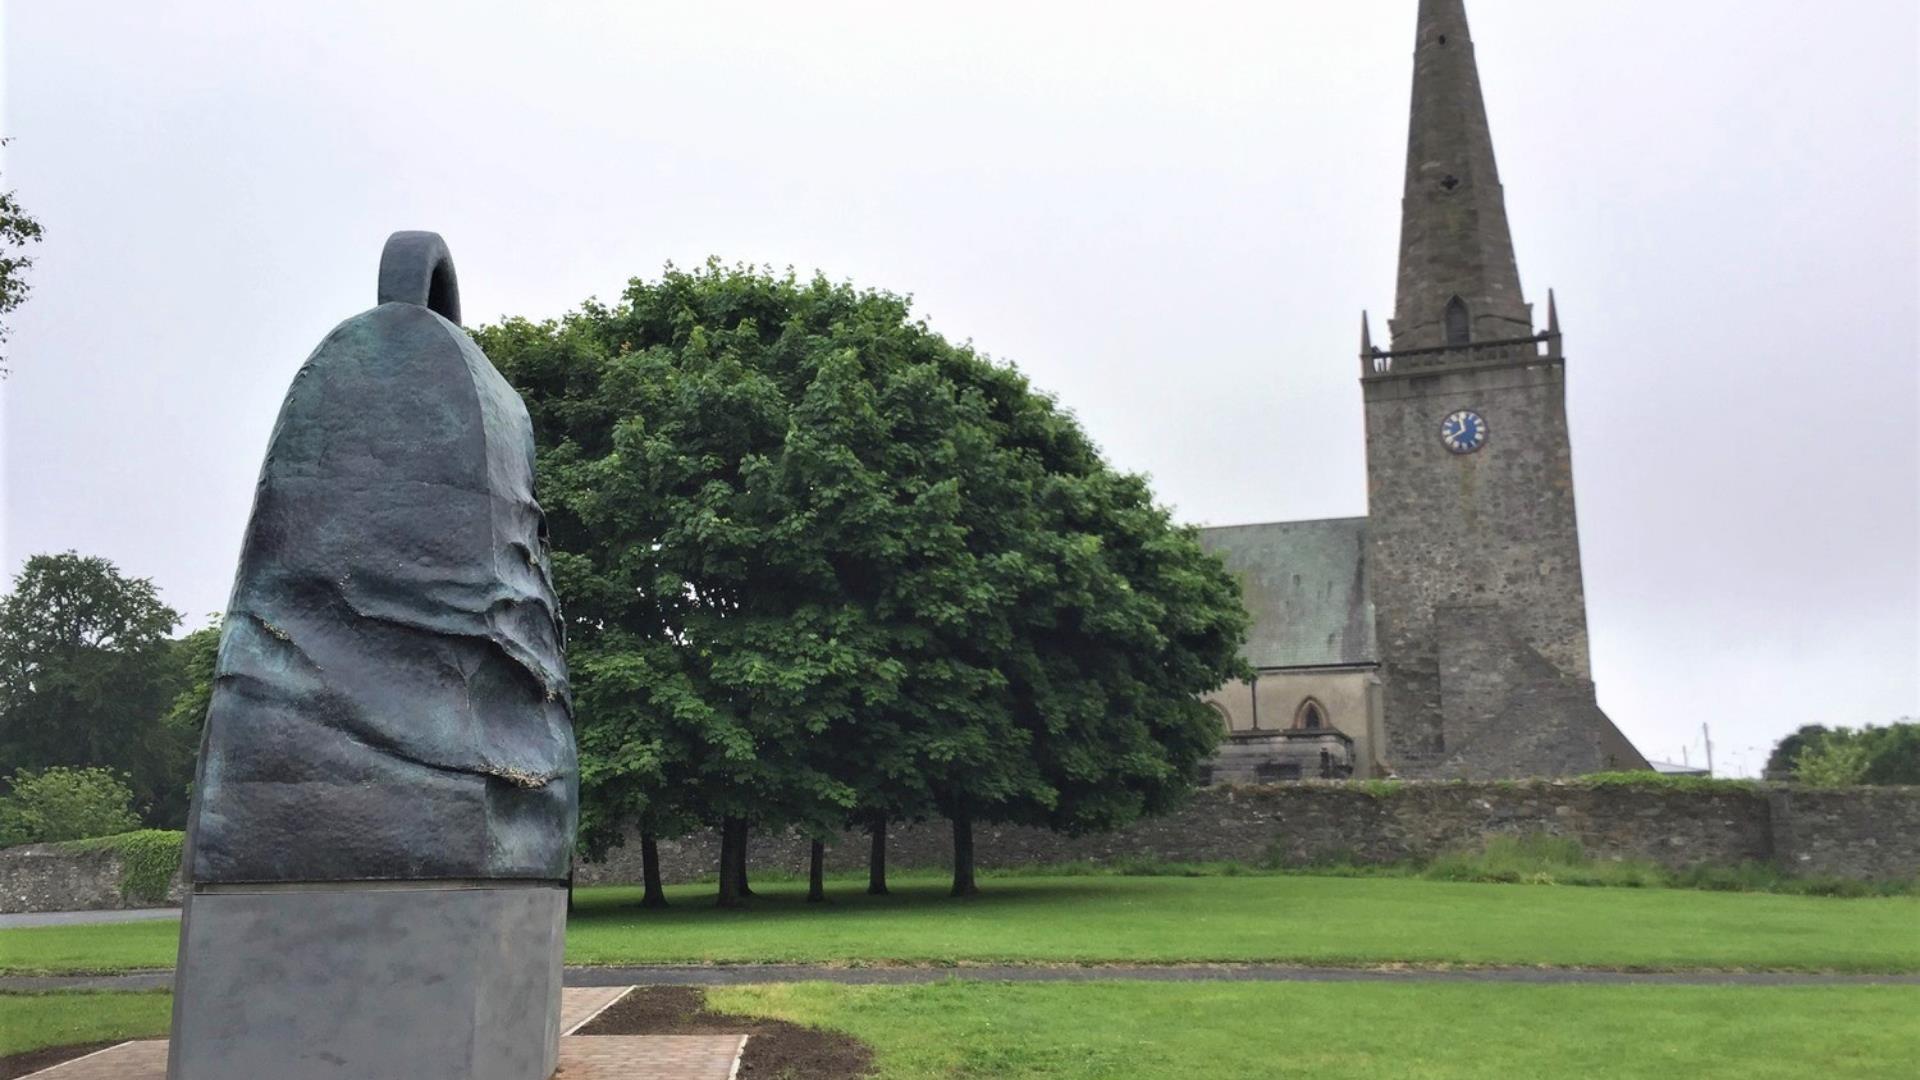 Statue of The Bangor Bell outside of Bangor Abbey in the city